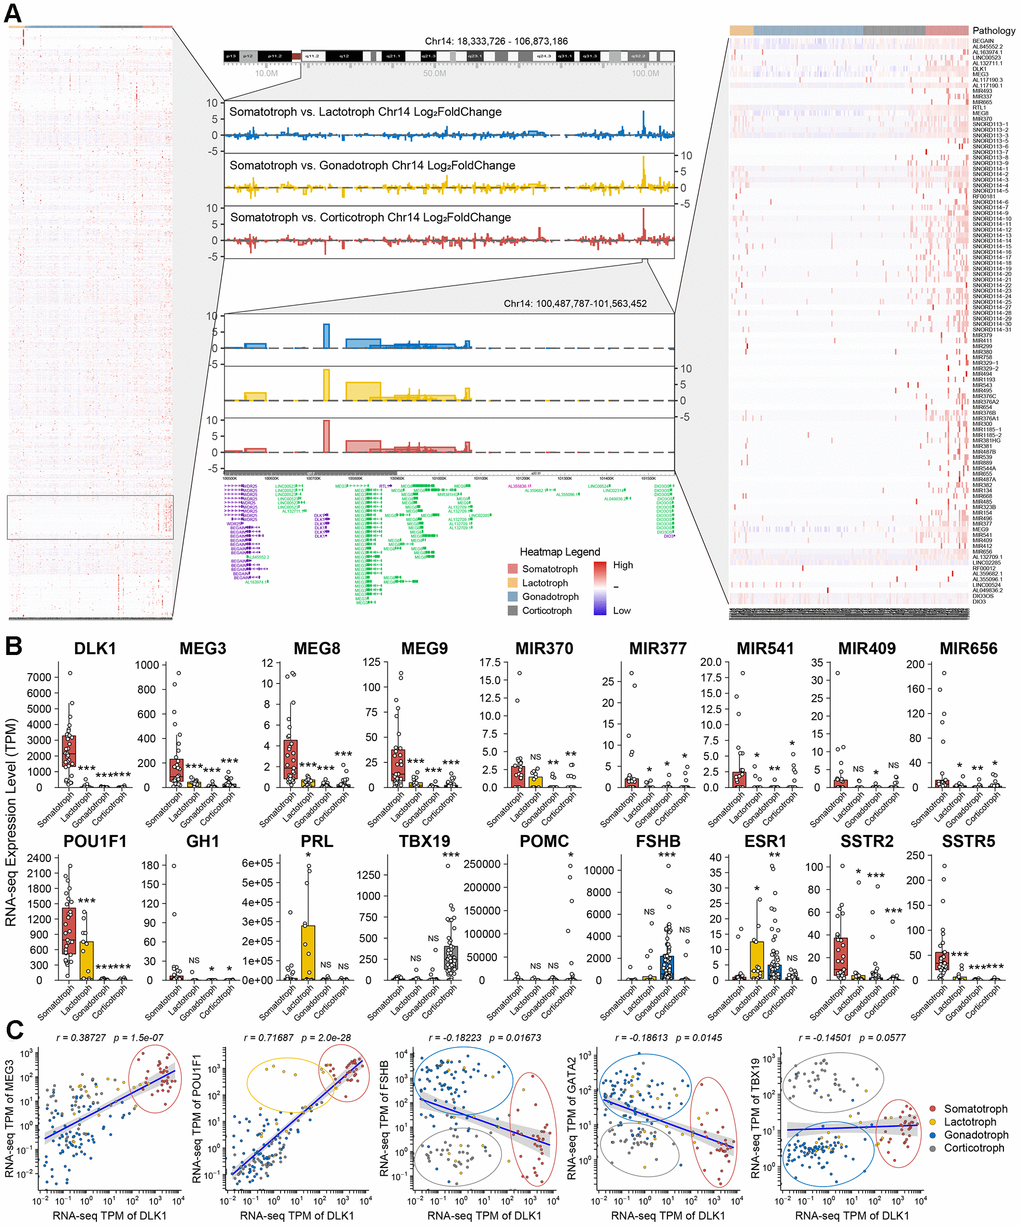 Description of DLK1/MEG3 locus in 172 PitNETs. (A) The imprinting disorders of 14q32.2 region was filtered based on genes distribution in Chromosome 14. A high-resolution profile showed the genomic positions and gene trees for DLK1/MEG3 locus. (B) The TPM values of DLK1/MEG3 and characteristic molecule in 172 PitNETs. (C) DLK1 combined transcription factors and immuophenotype could distinguish somatotroph, lactotroph, gonadotroph and corticotroph PitNET patients. *compare to control group PPP